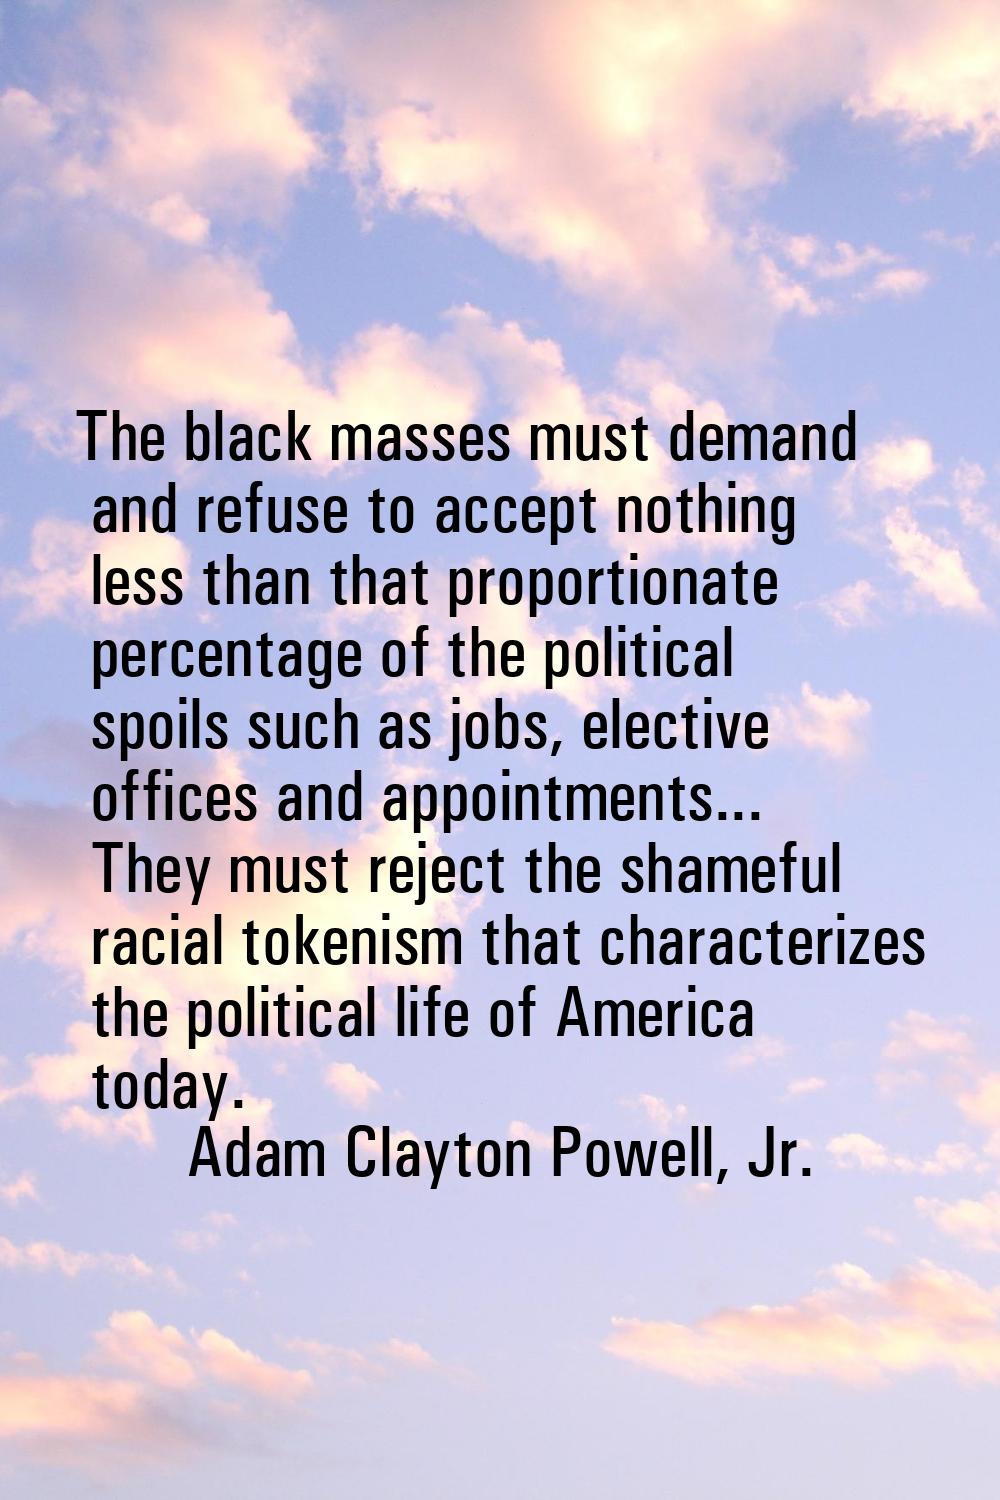 The black masses must demand and refuse to accept nothing less than that proportionate percentage o